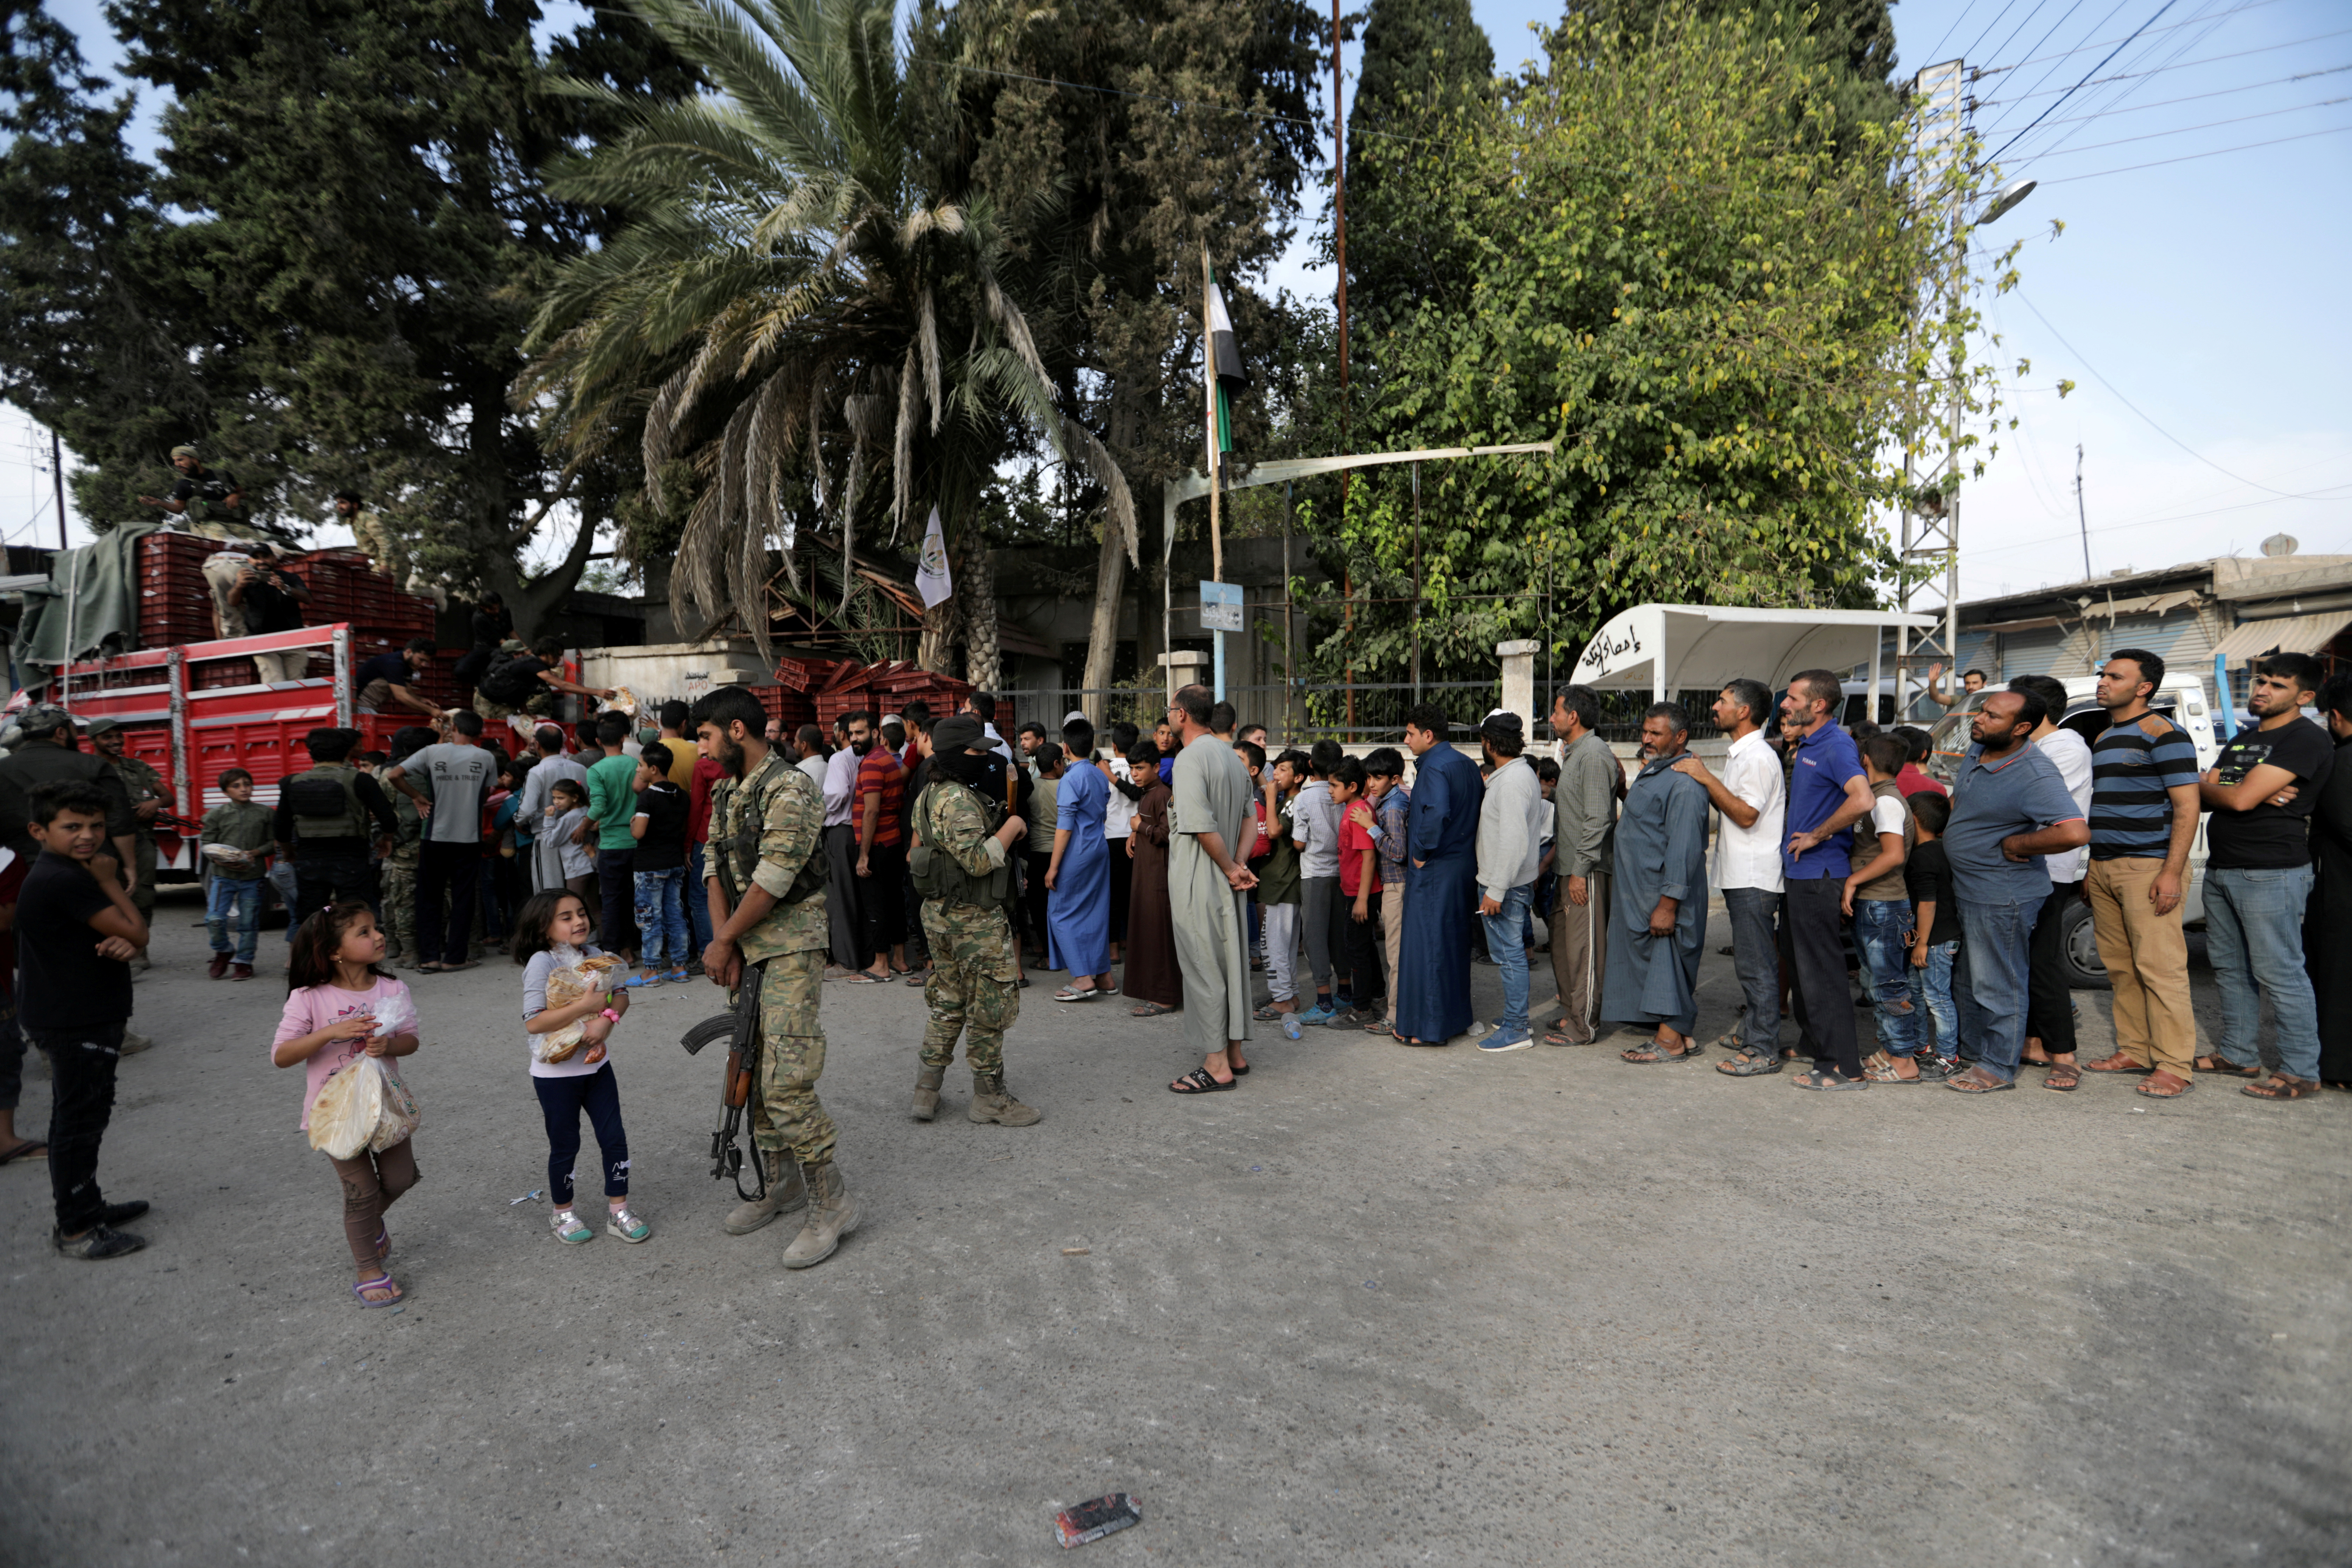 People stand in a queue to get bread in the border town of Tal Abyad, Syria, October 15, 2019. REUTERS/Khalil Ashawi